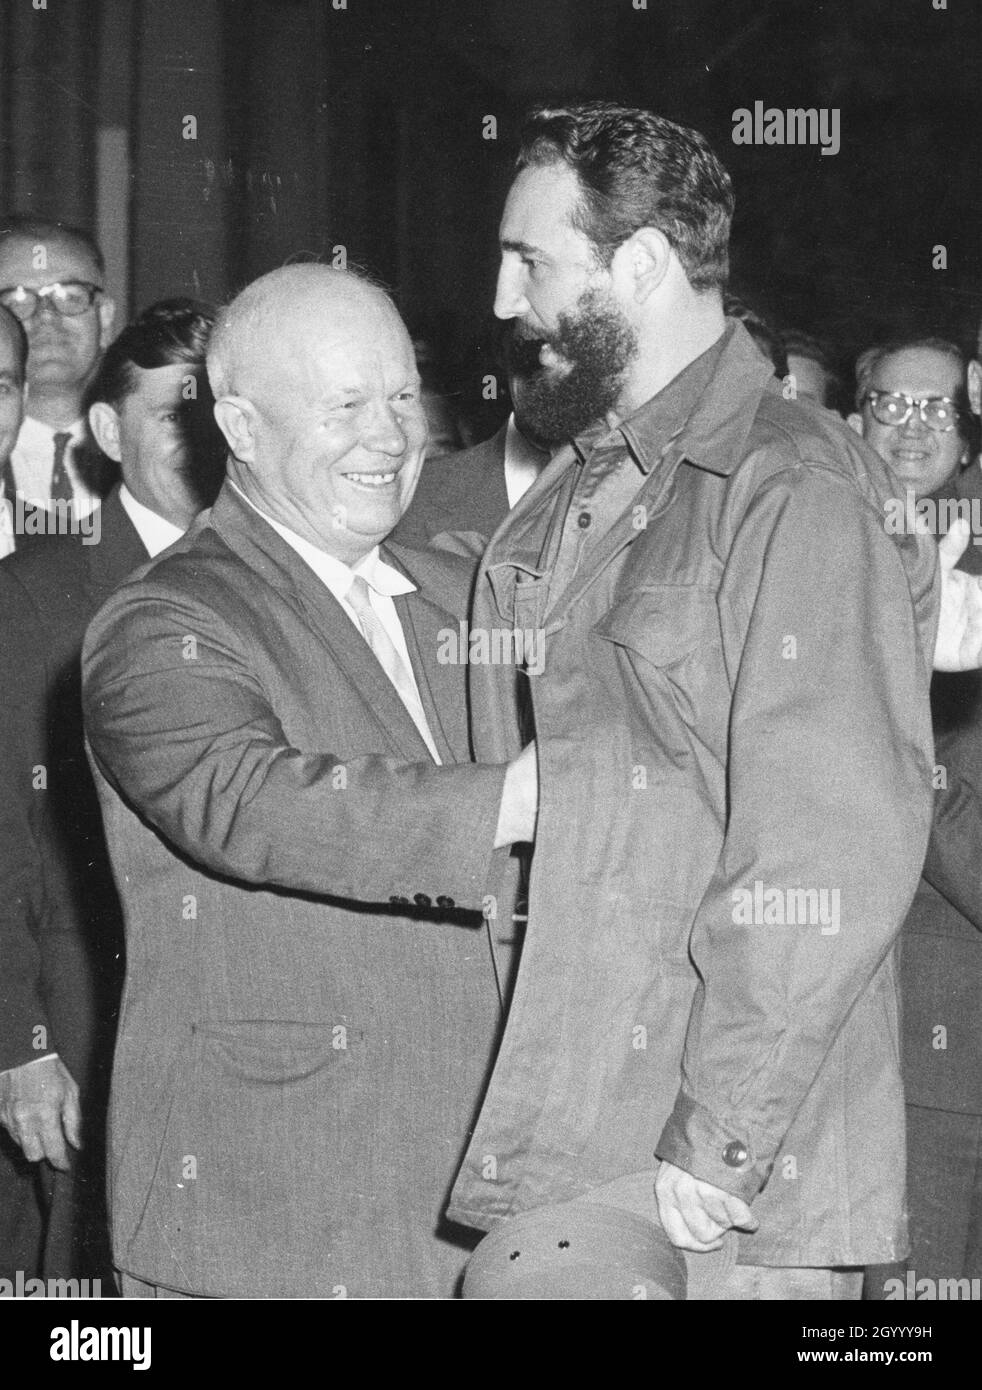 Soviet Premier Nikita Khrushchev (left) gives Cuban Premier Fidel Castro an affectionate pat on the back as the latter arrives for dinner at the Soviet legation. Both were in New York City for the 15th General Assembly of the UN. New York City, 9-23-60. Stock Photo